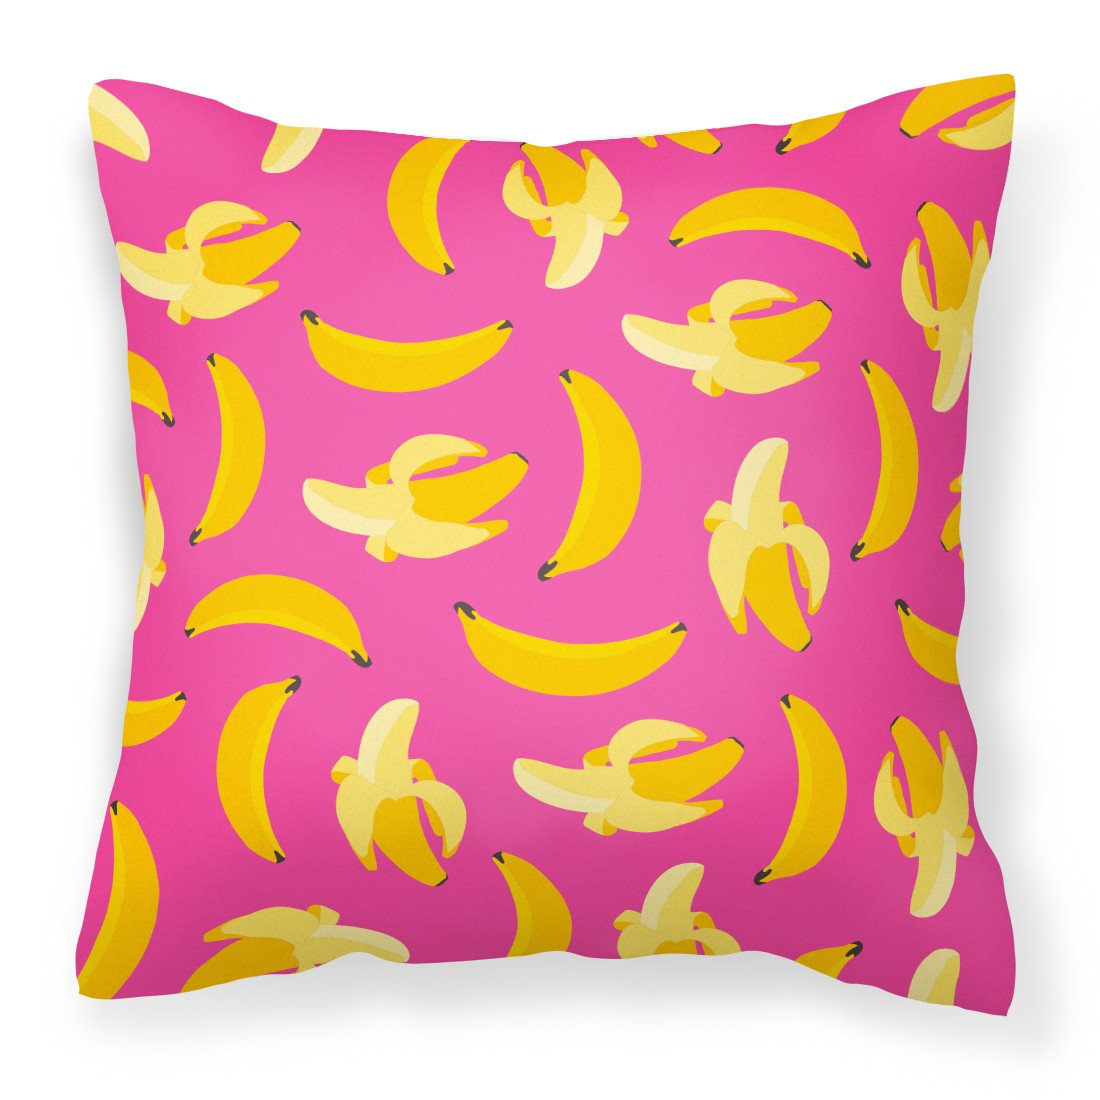 Bananas on Pink Fabric Decorative Pillow BB5140PW1818 by Caroline's Treasures